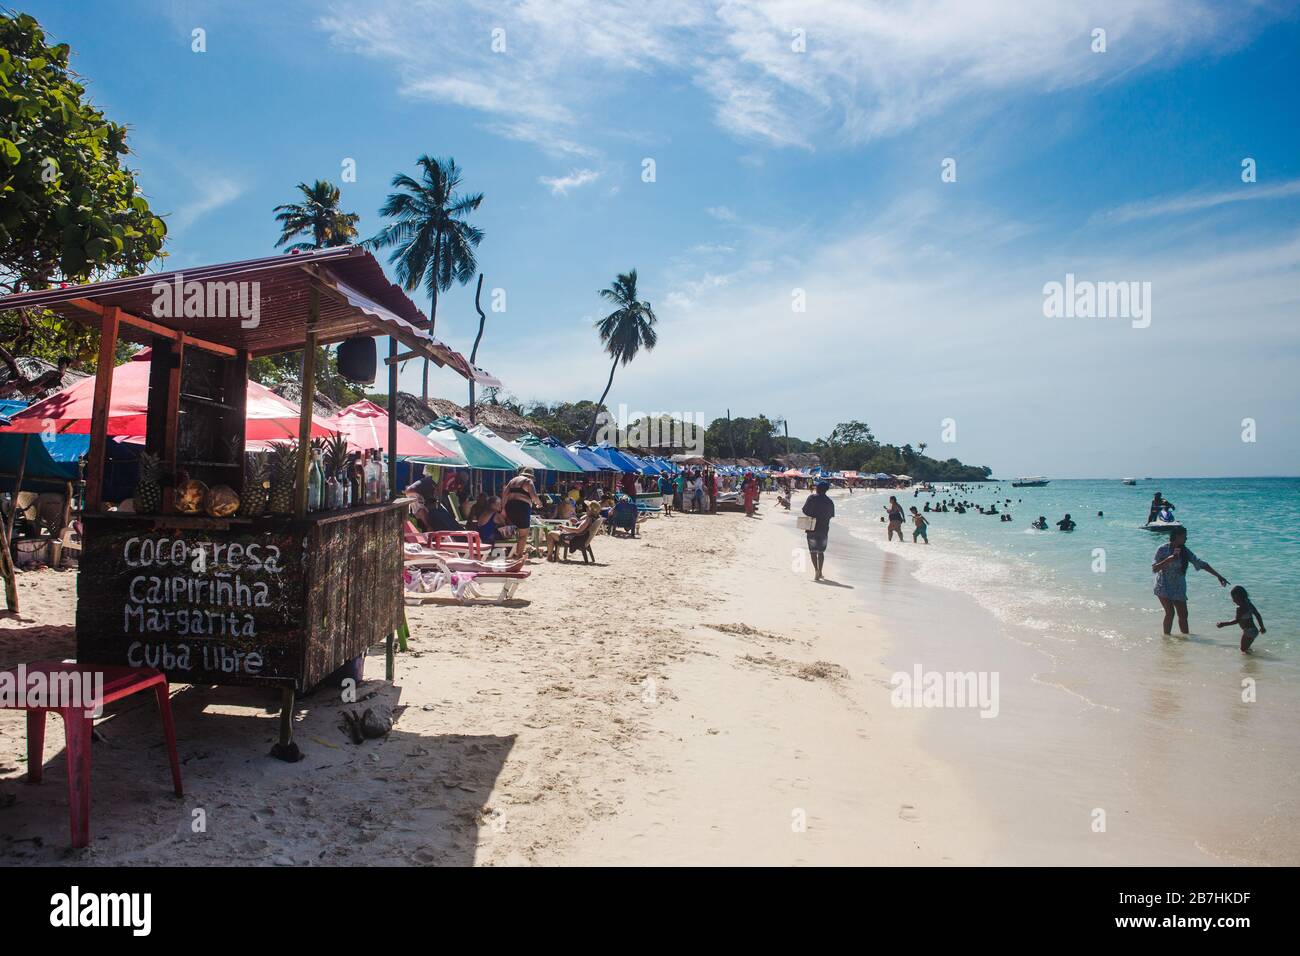 Cocktail stalls and deckchairs on the busy white-sanded beach and turquoise waters of Baru Island off the Caribbean coast of Cartagena, Colombia Stock Photo